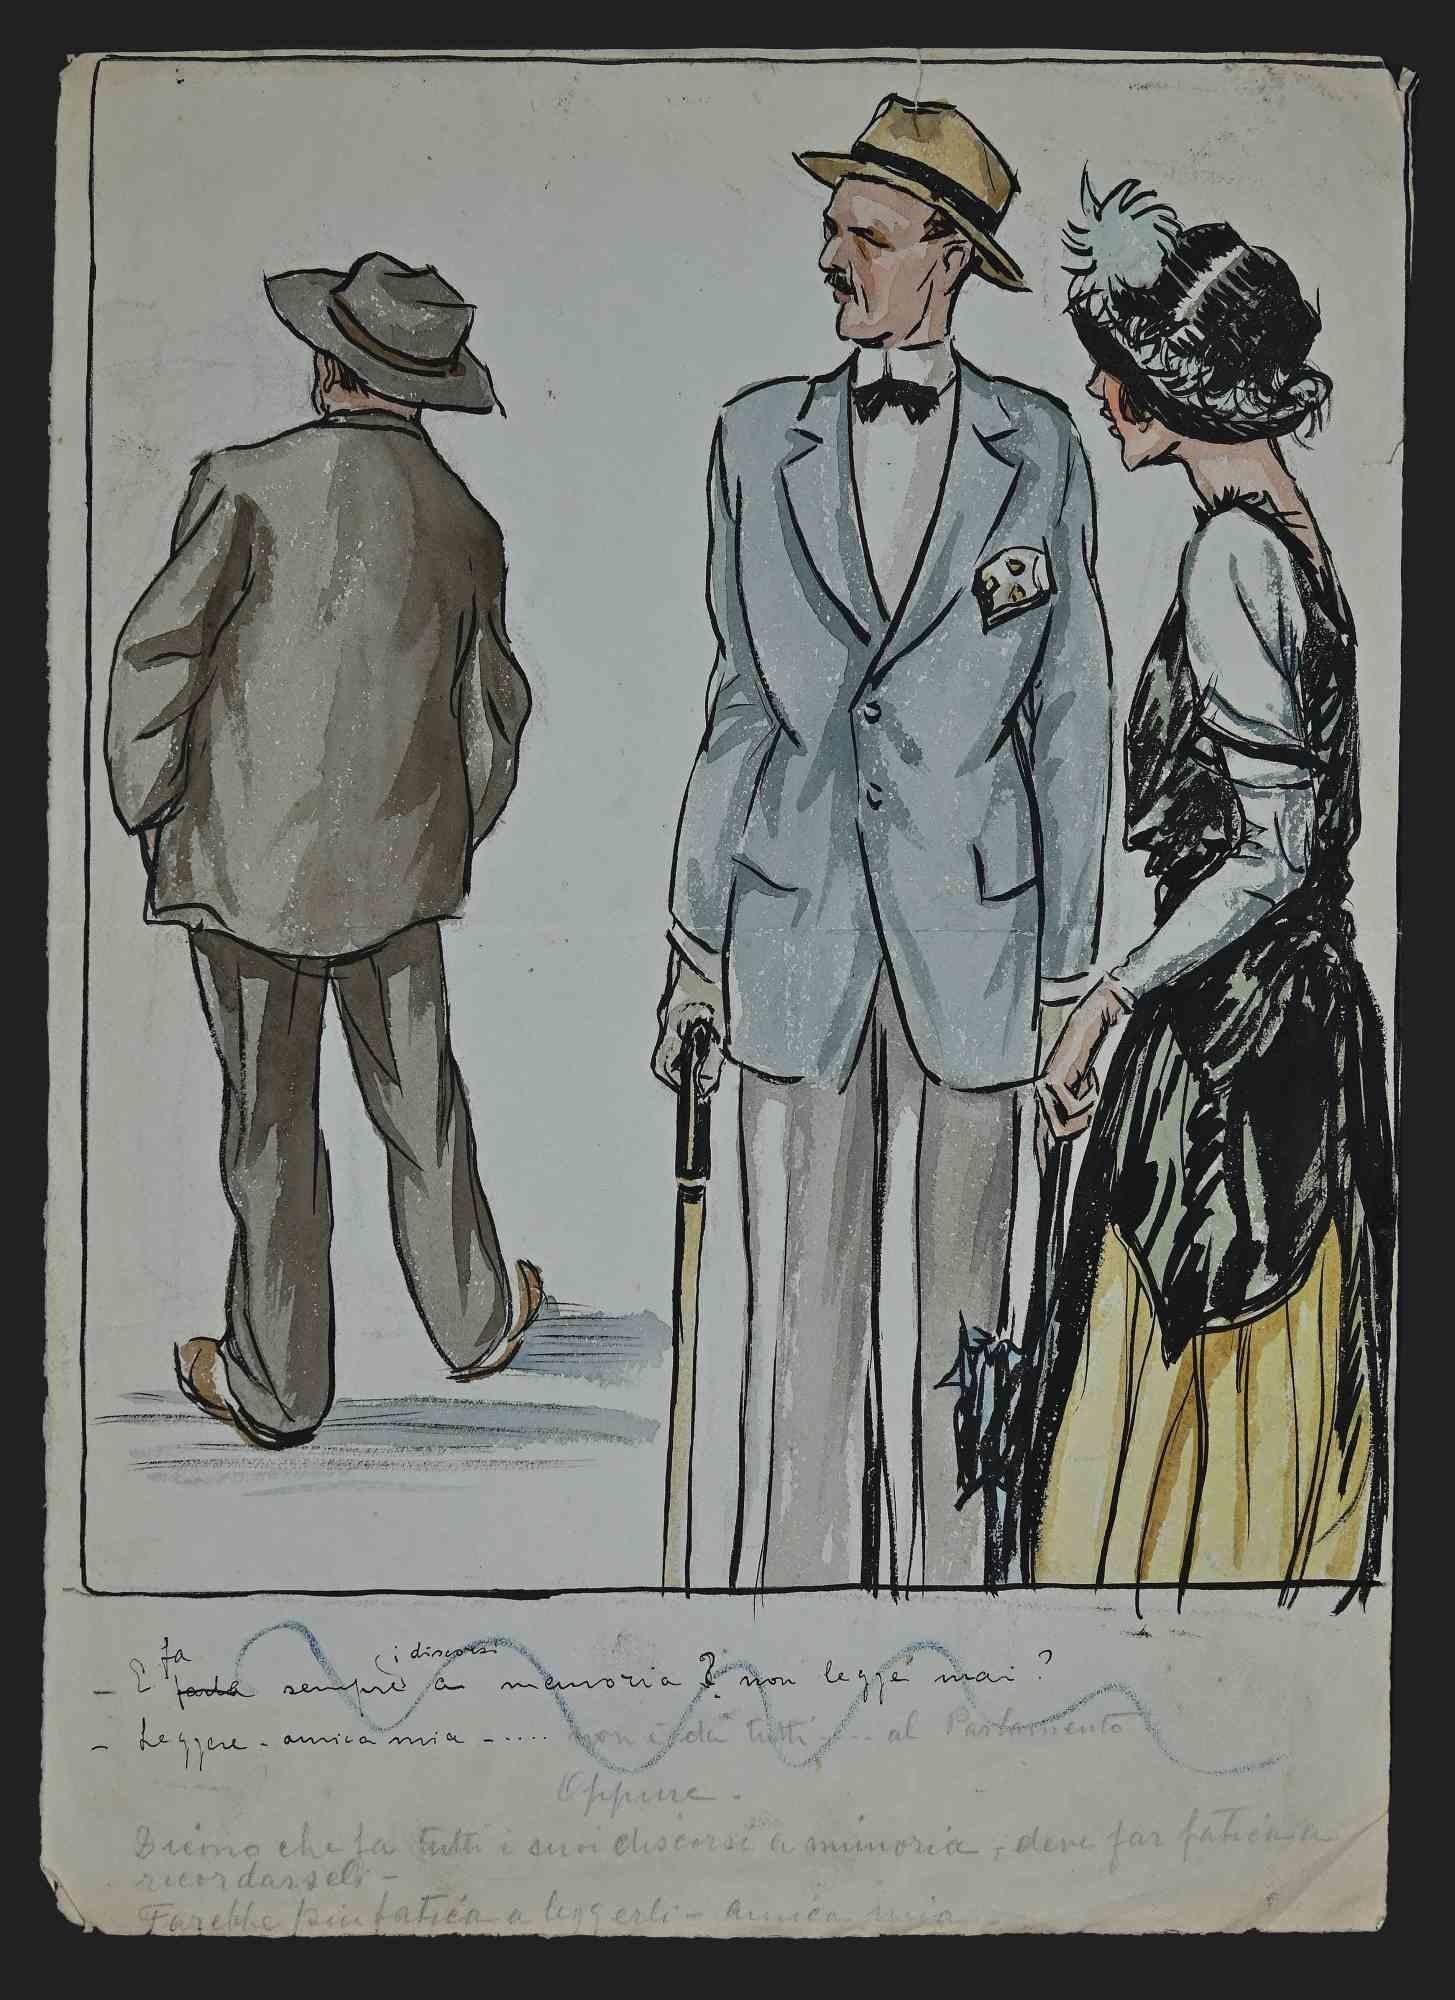 The Elite - Ink and Watercolor Drawing by Luigi Bompard - 1920s